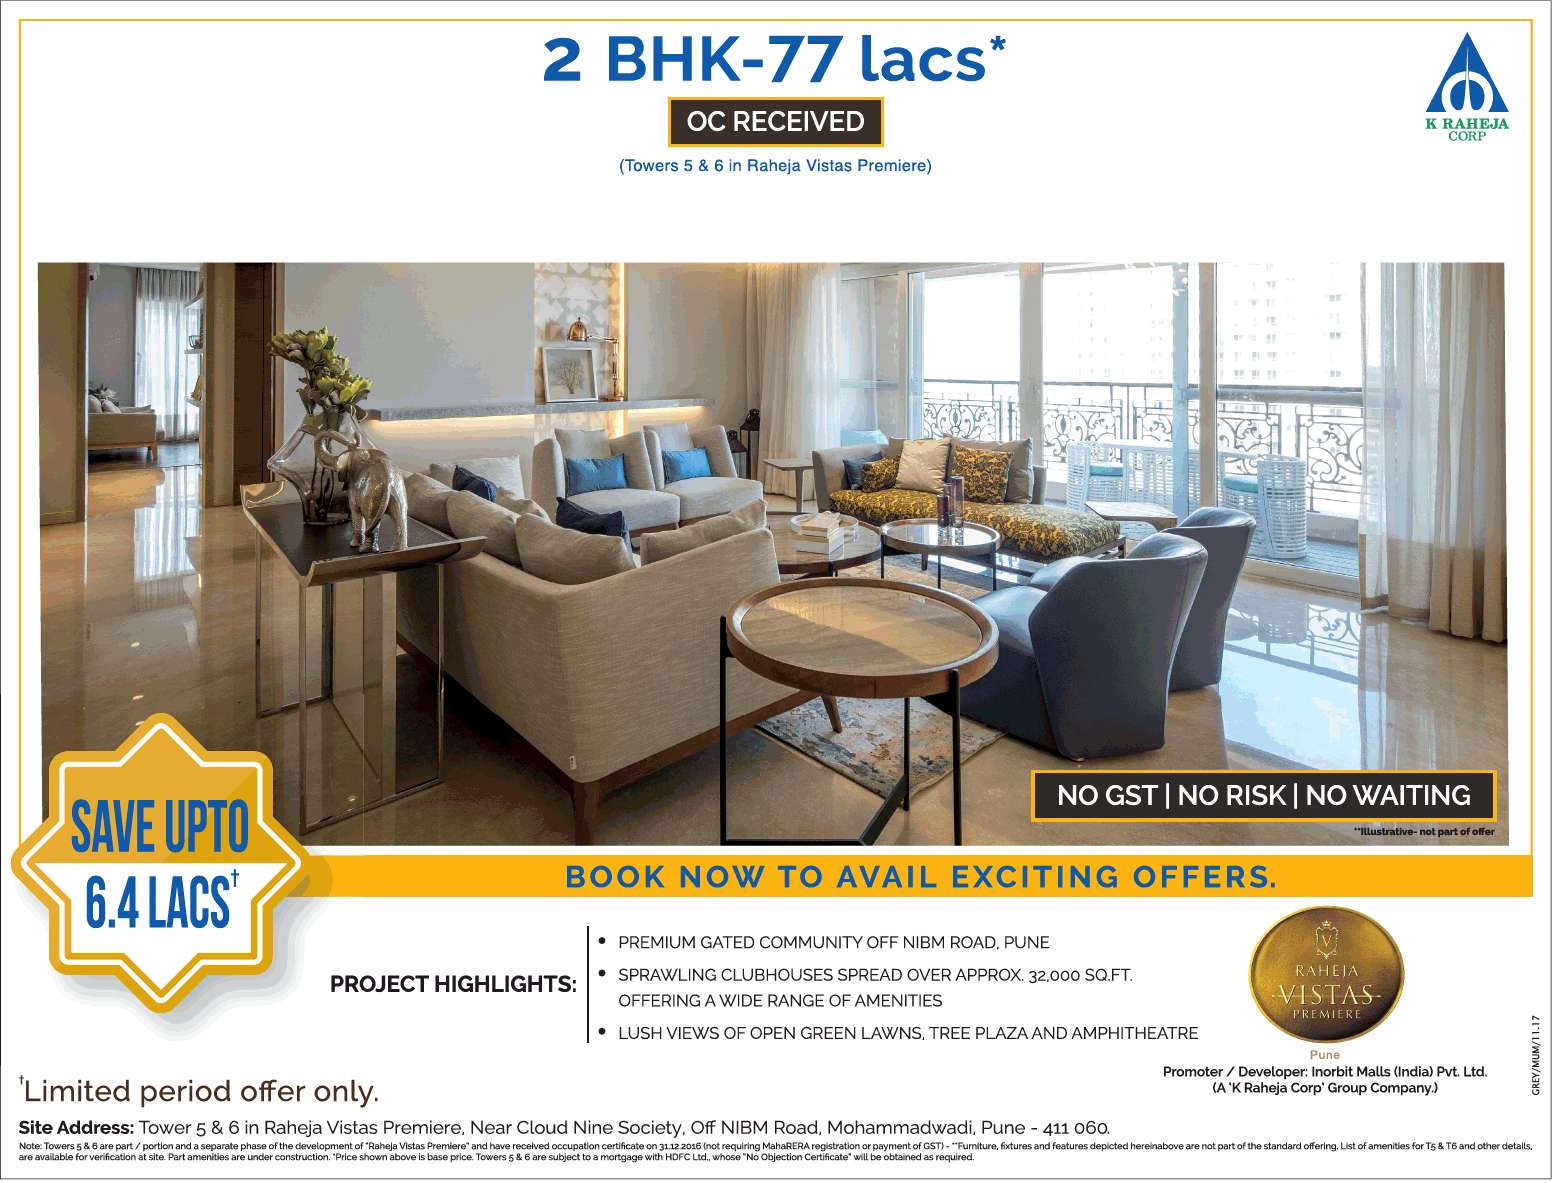 Book homes now to avail exciting offers at K Raheja Vistas in Pune Update